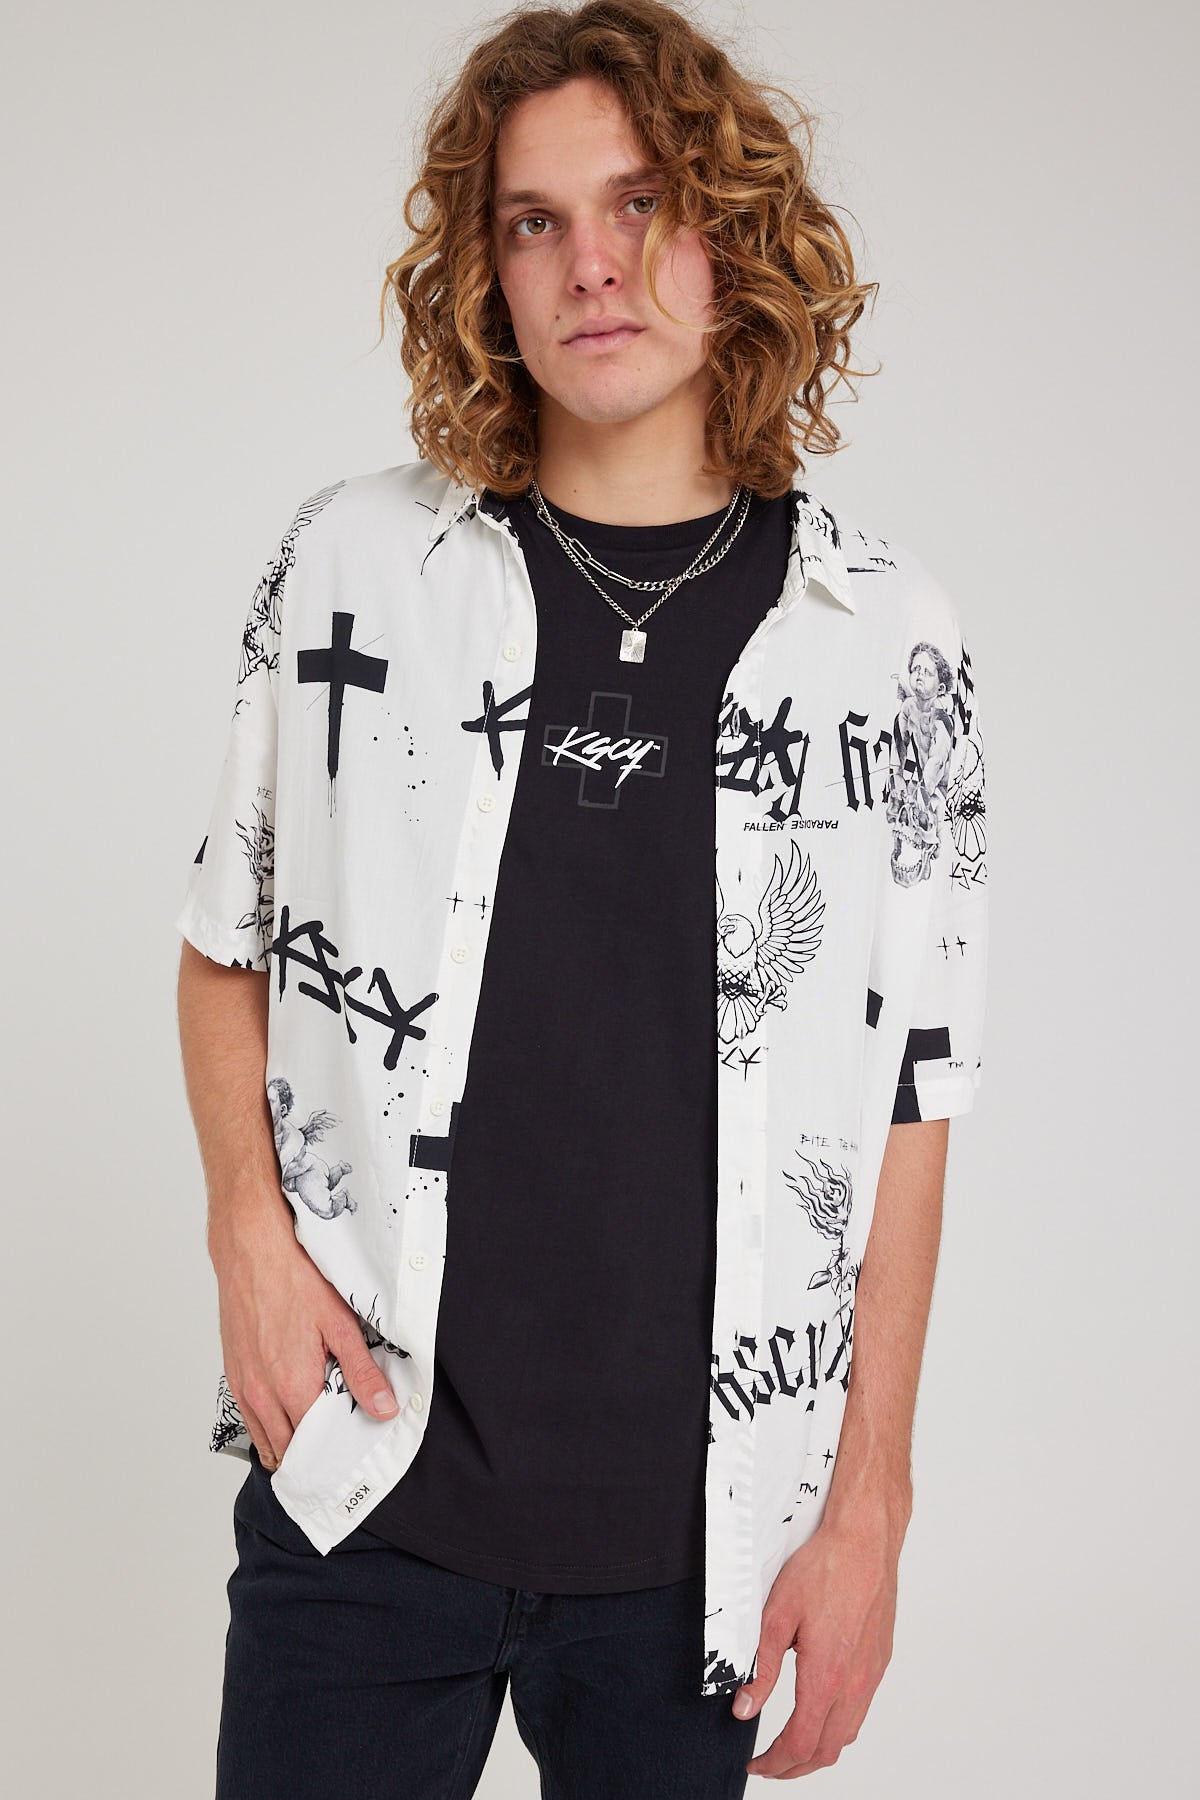 Kiss Chacey Medina Relaxed S/S Shirt Black/White